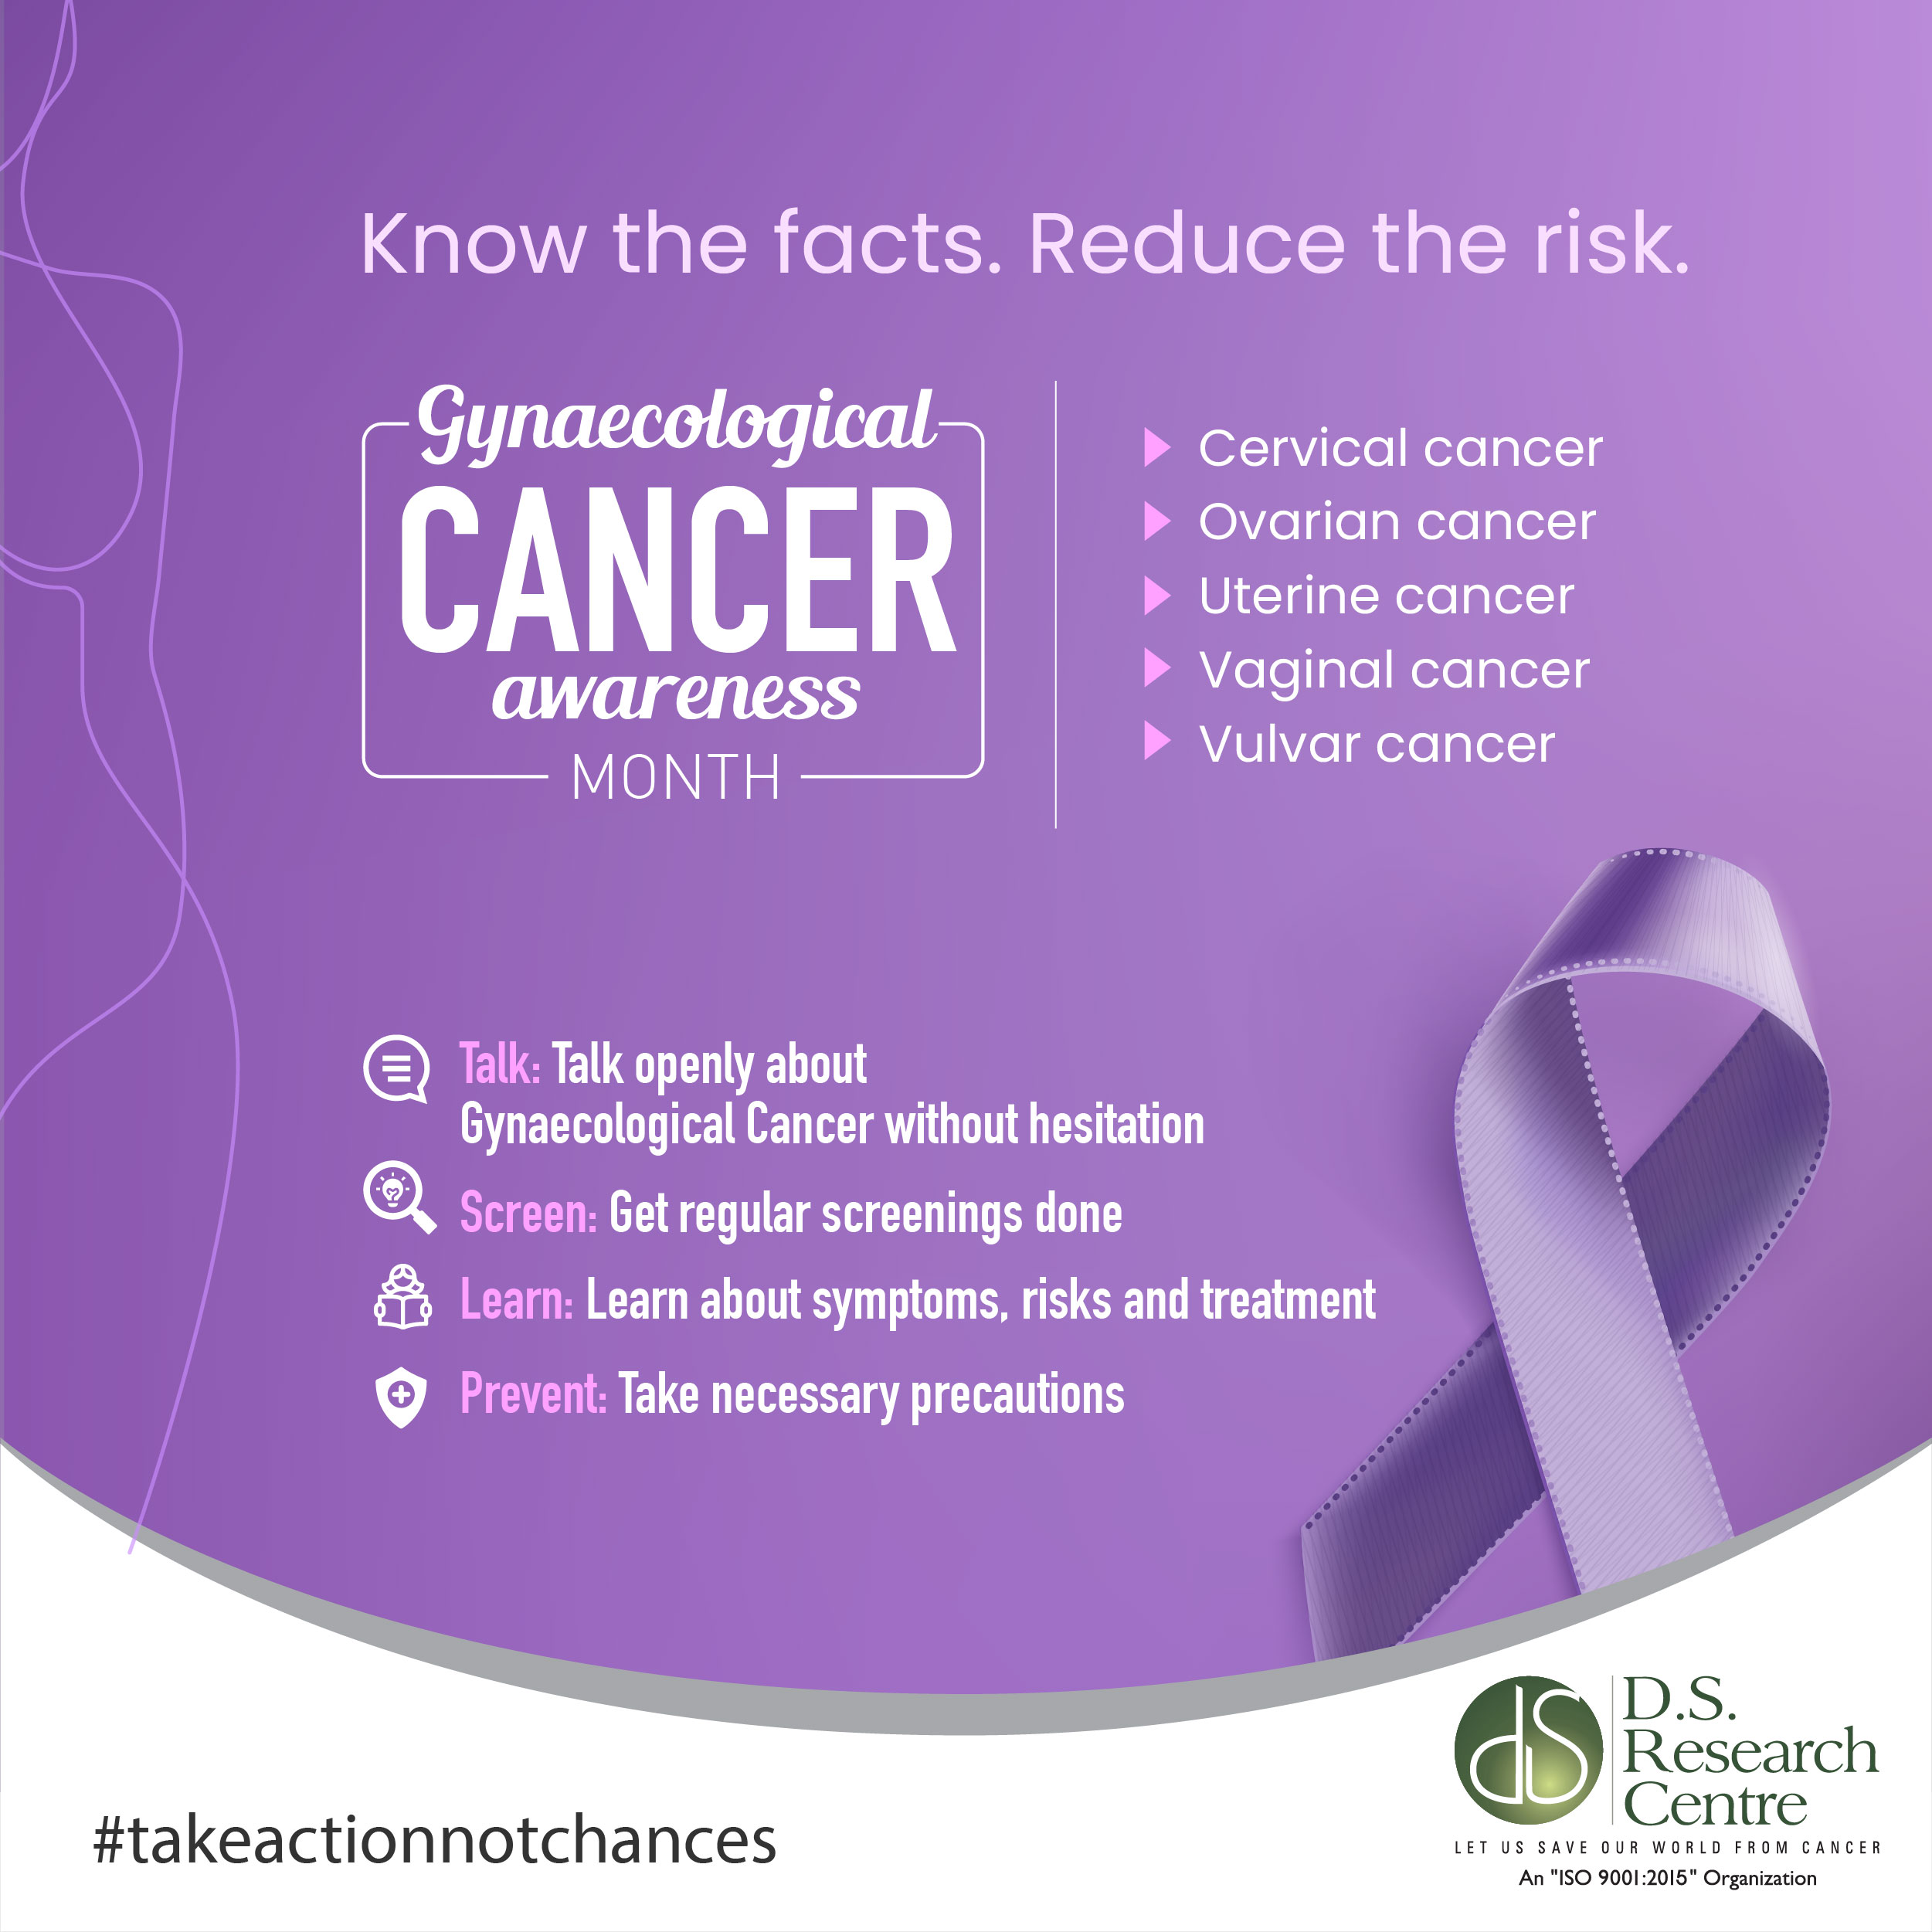 How Are Gynecologic Cancers Treated?